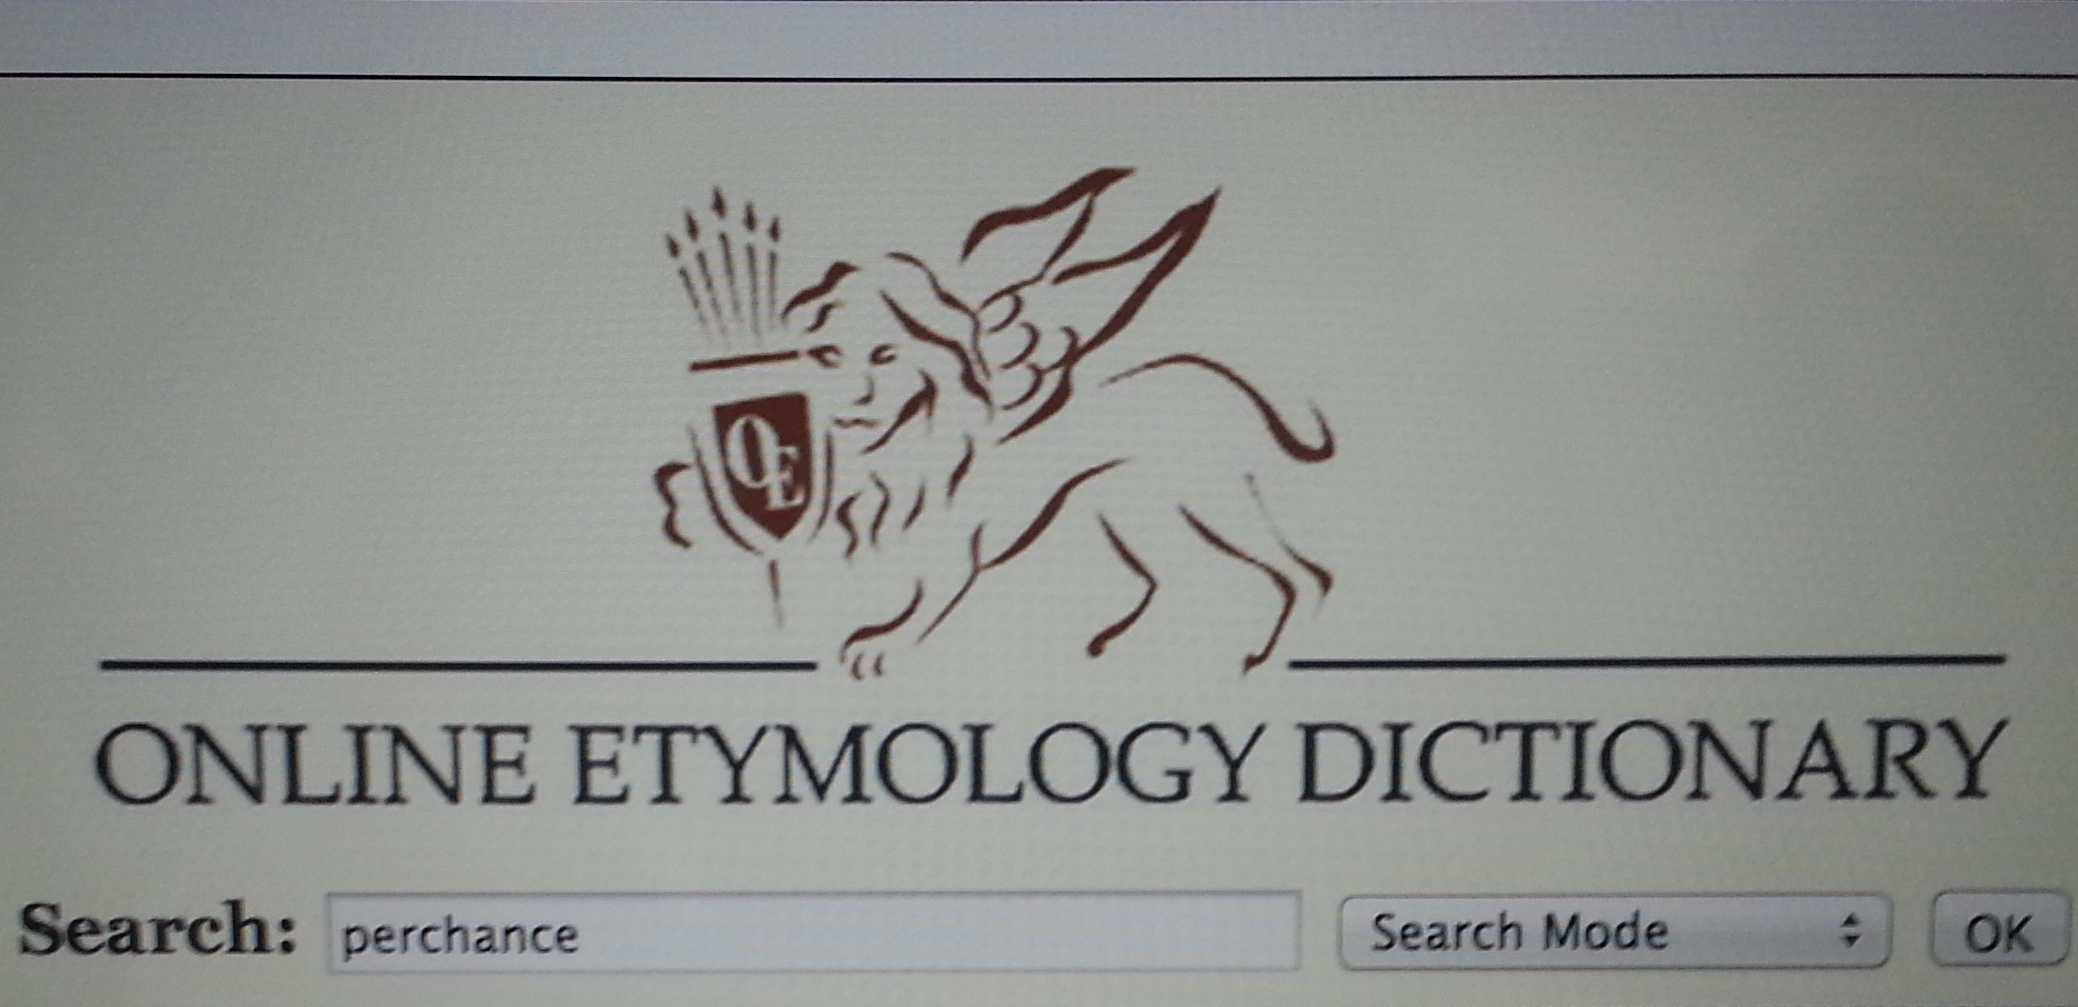 Looking up the etymology of words can be considered fun work for some.